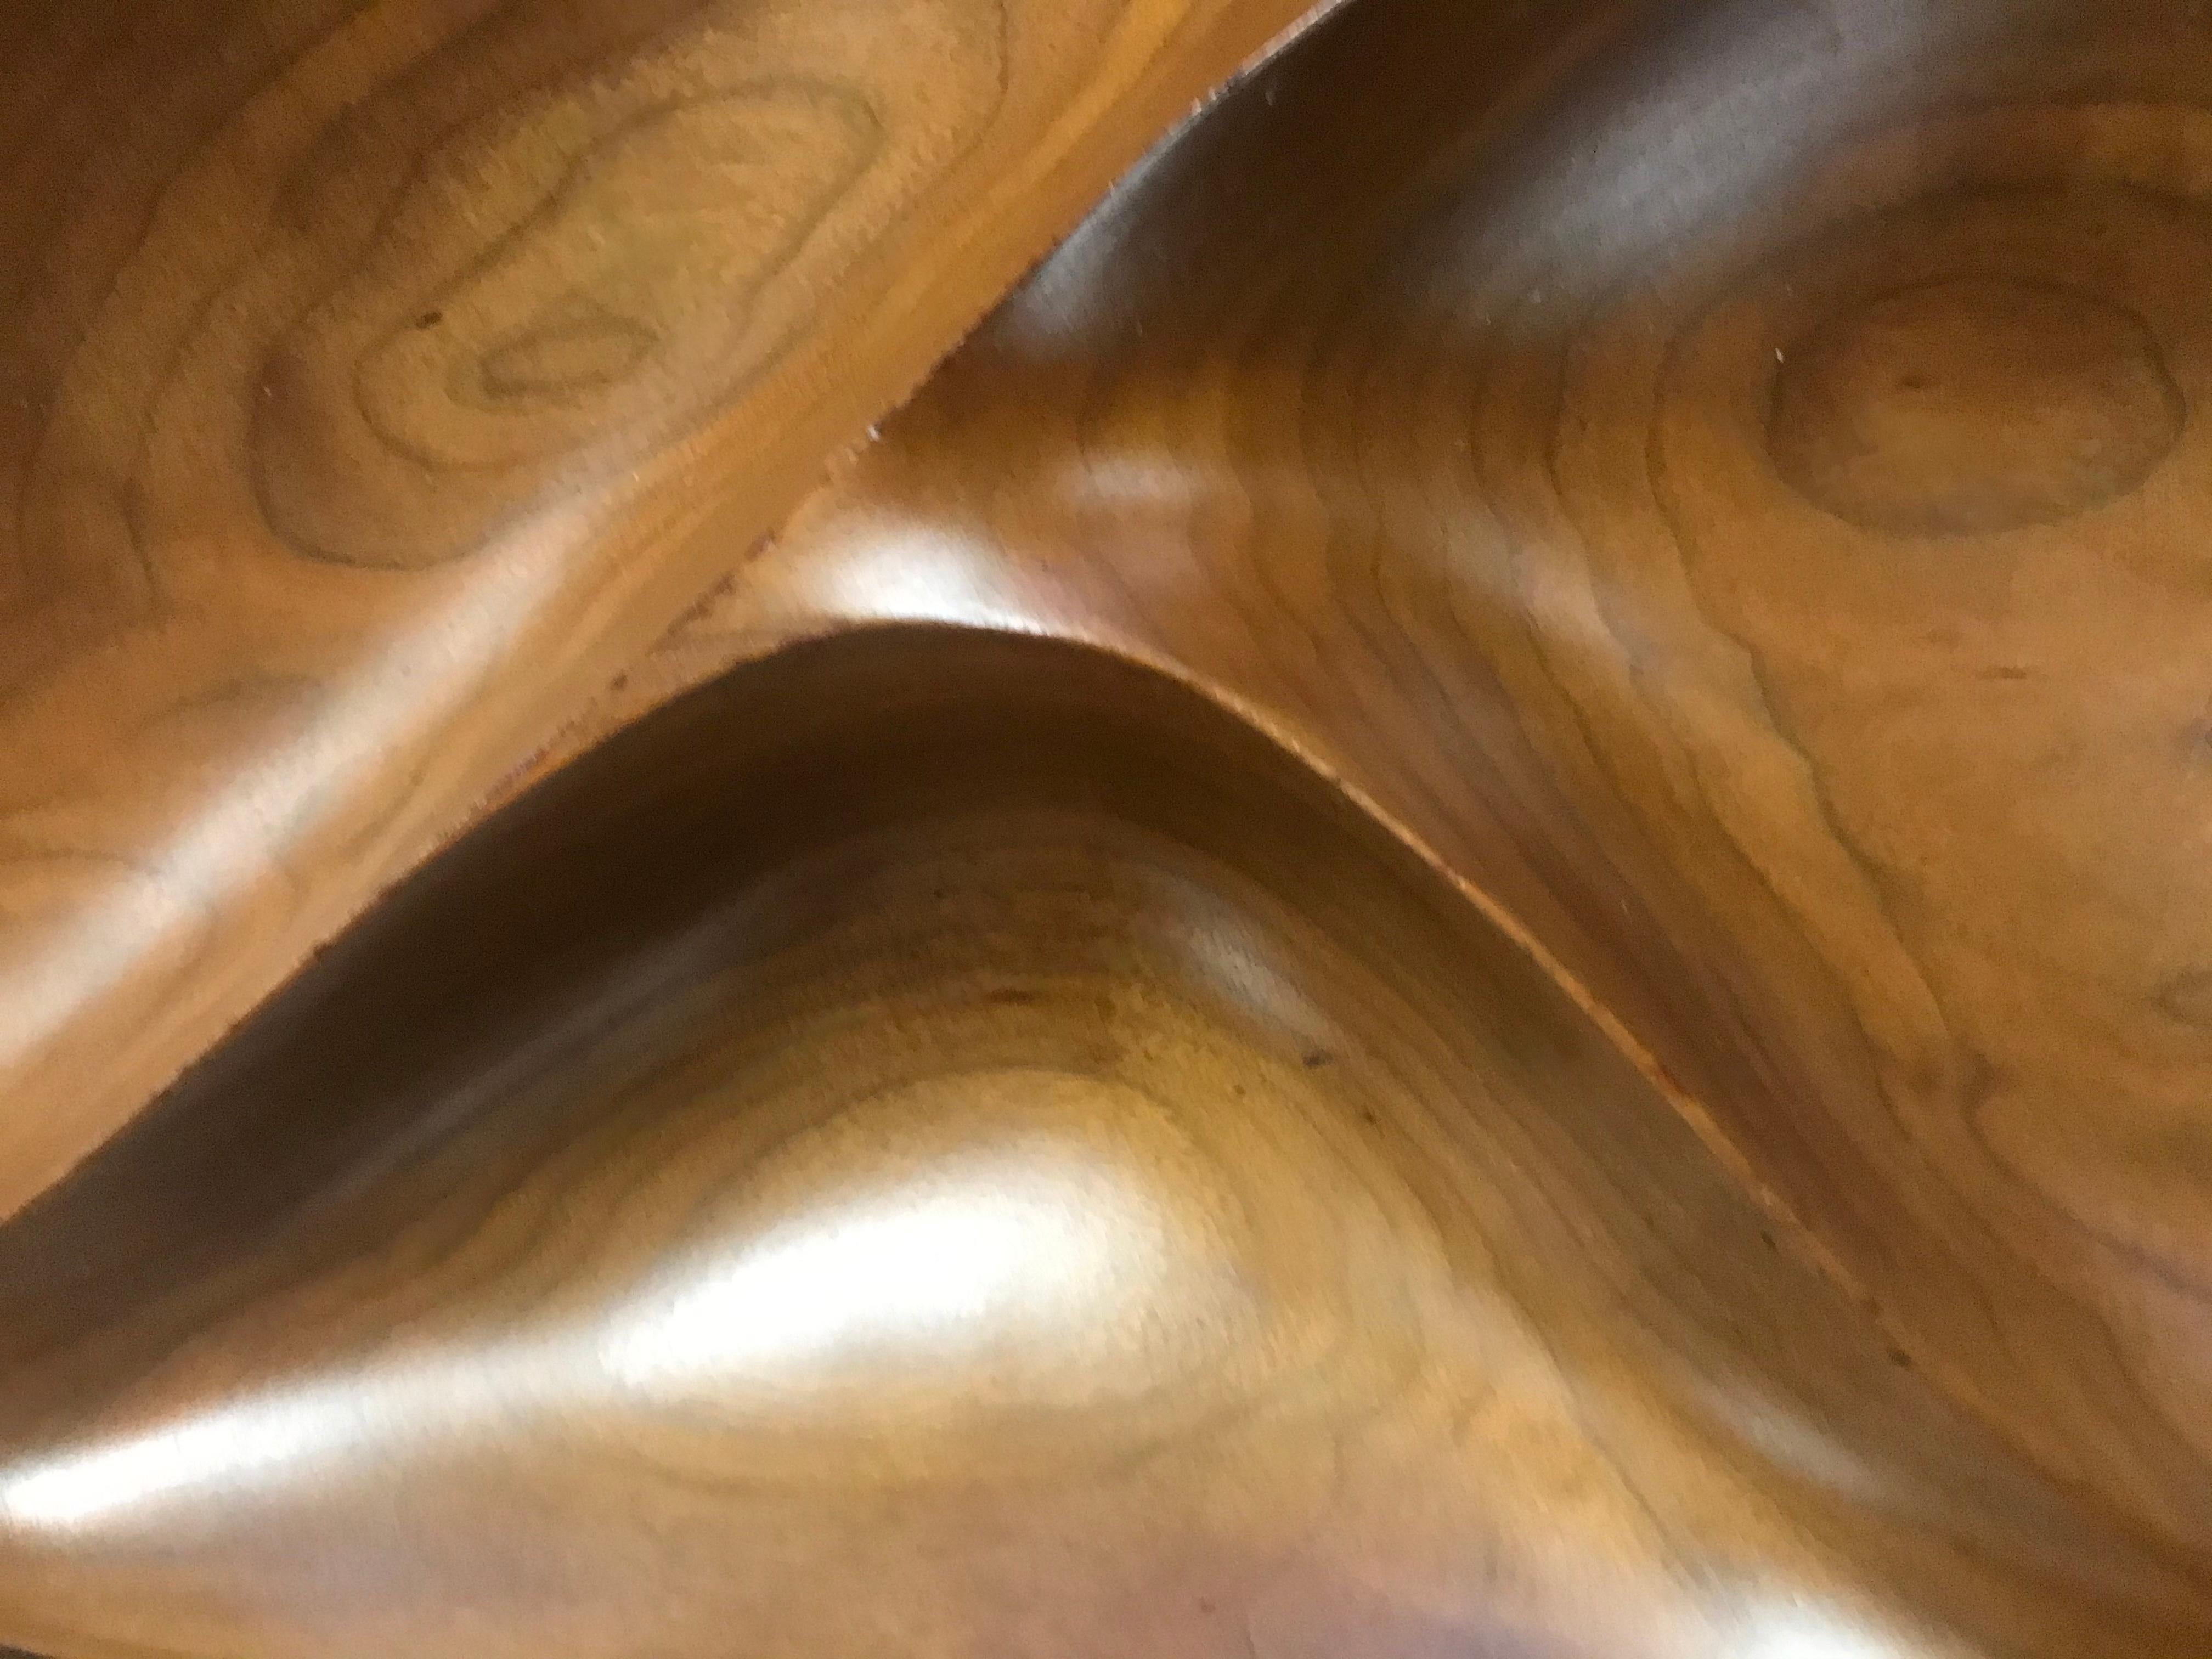 An exquisitely carved compartmental freeform bowl by Emil Milan (1922-1985), executed in richly grained walnut. Rich patina throughout. Signed to the underside, 